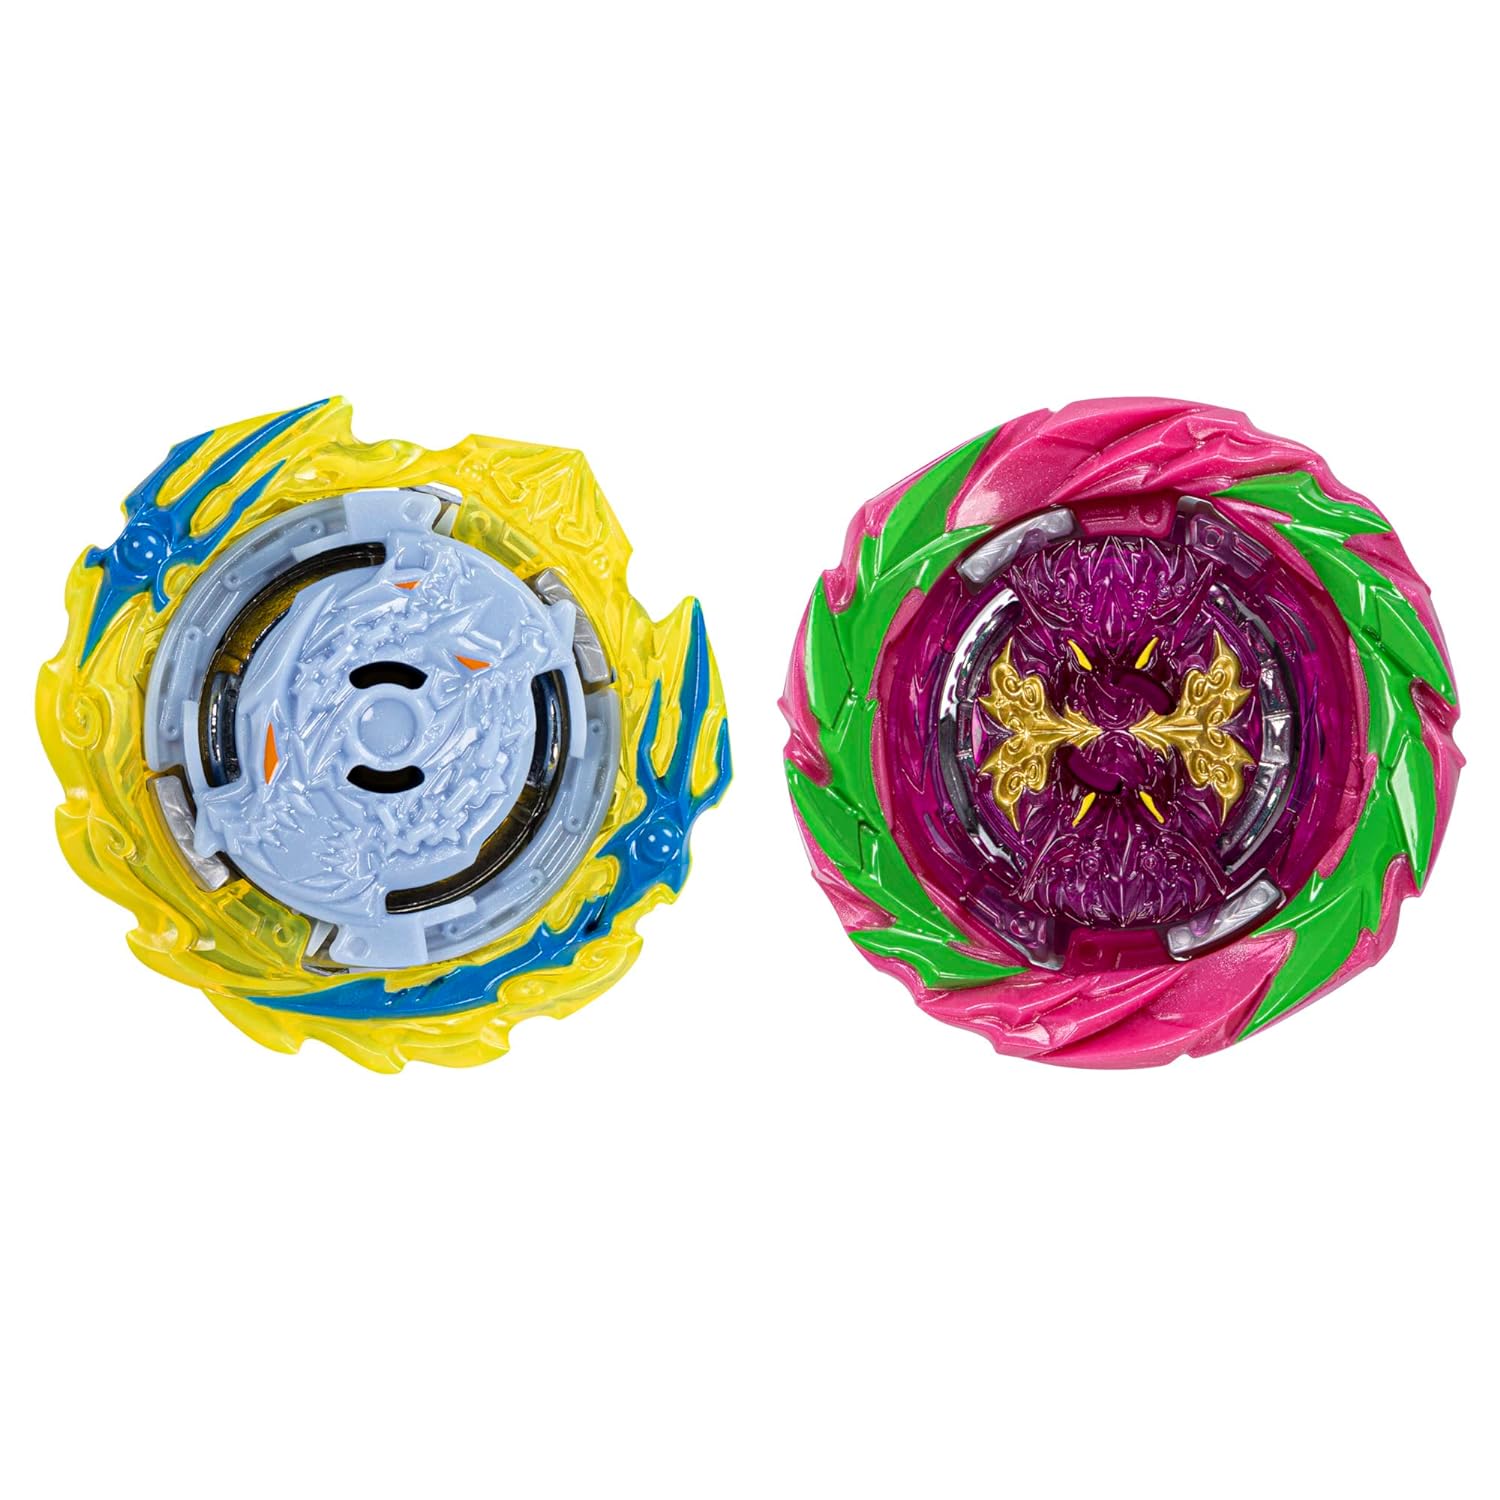 Beyblade Burst QuadStrike Fierce Bazilisk B8 and Hydra Kerbeus K8 Spinning Top Dual Pack, 2 Battling Game Top Toy for Kids Ages 8 and Up